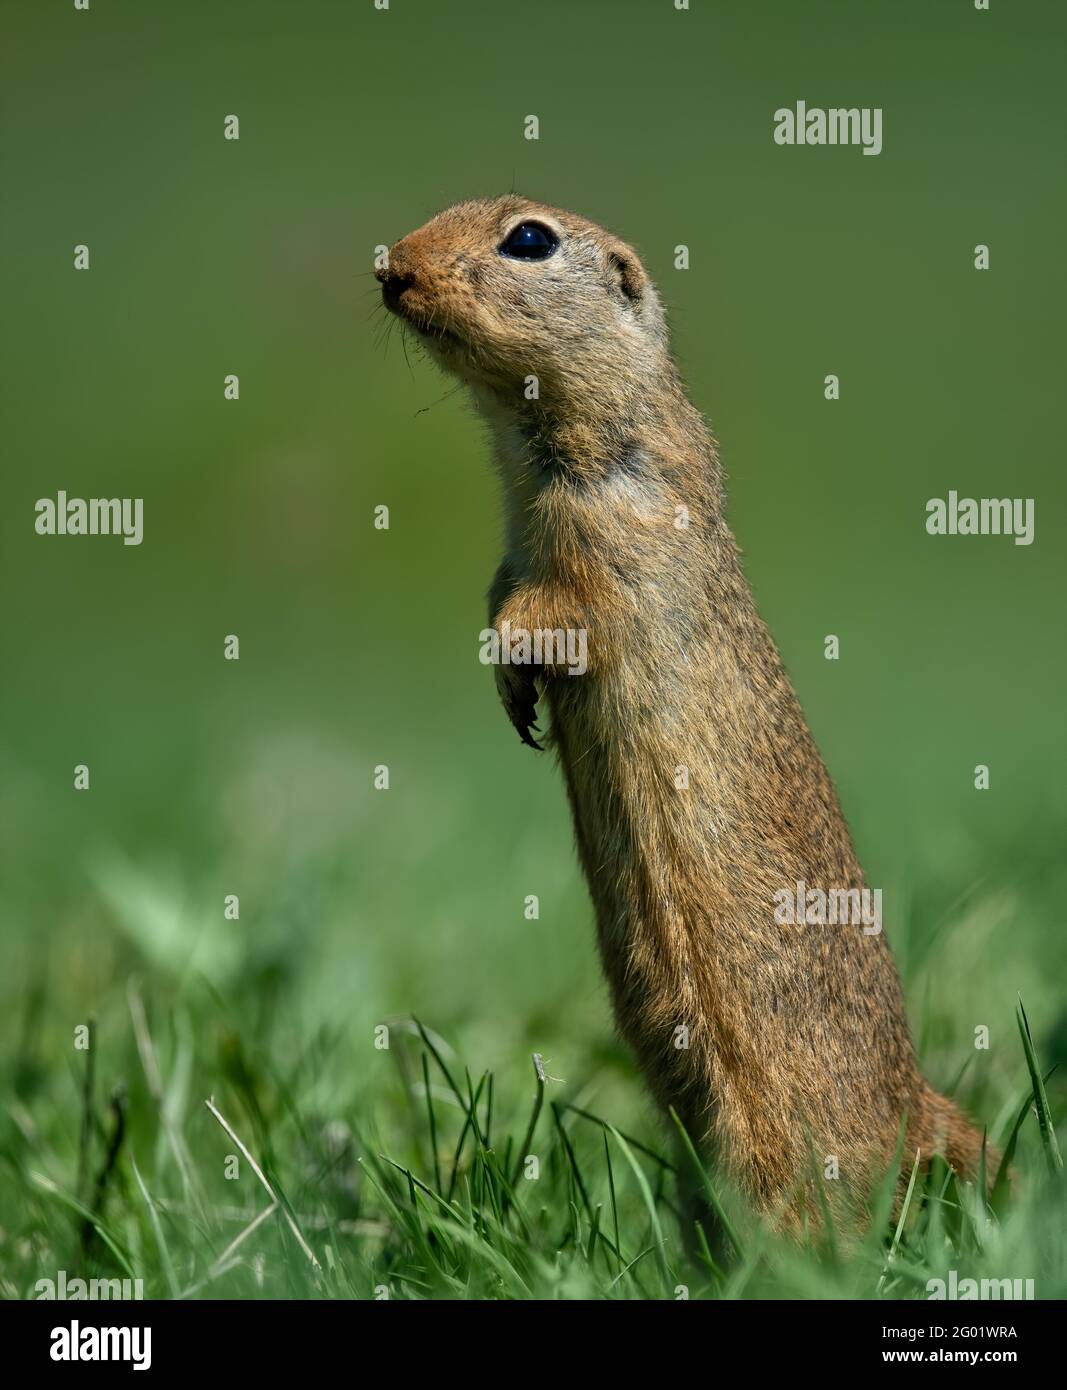 European ground squirrel (Spermophilus citellus), also known as the European souslik standing on green grass meadow and looking for some danger. Stock Photo